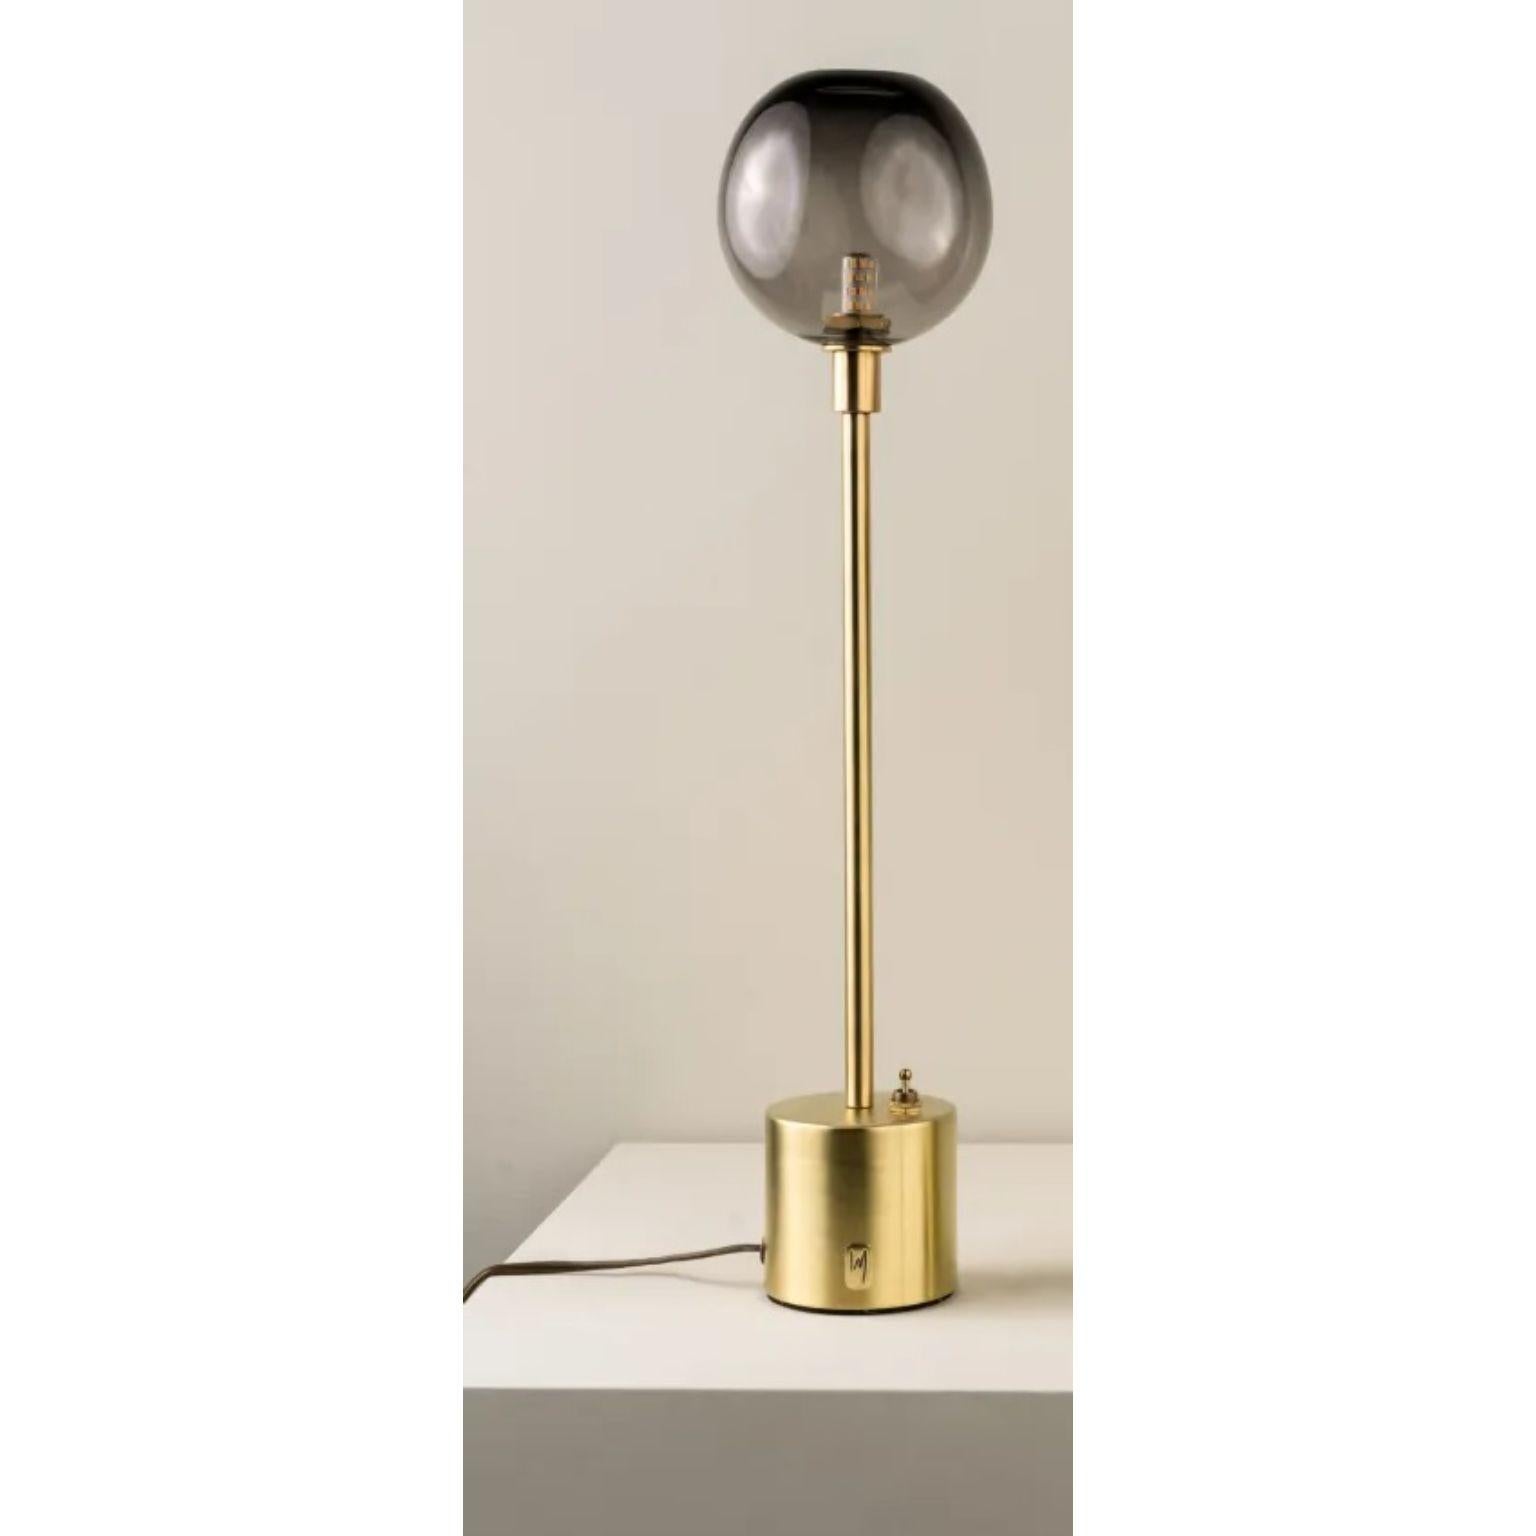 Átomo Smoke Blown Glass and Brass Table Lamp by Isabel Moncada
Dimensions: Ø 13 x H 33 cm.
Materials: Brass, steel and blown glass.

Átomo is perfect to give a touch of silent light, almost like a sparkle. The simplicity of its globe is enough, a